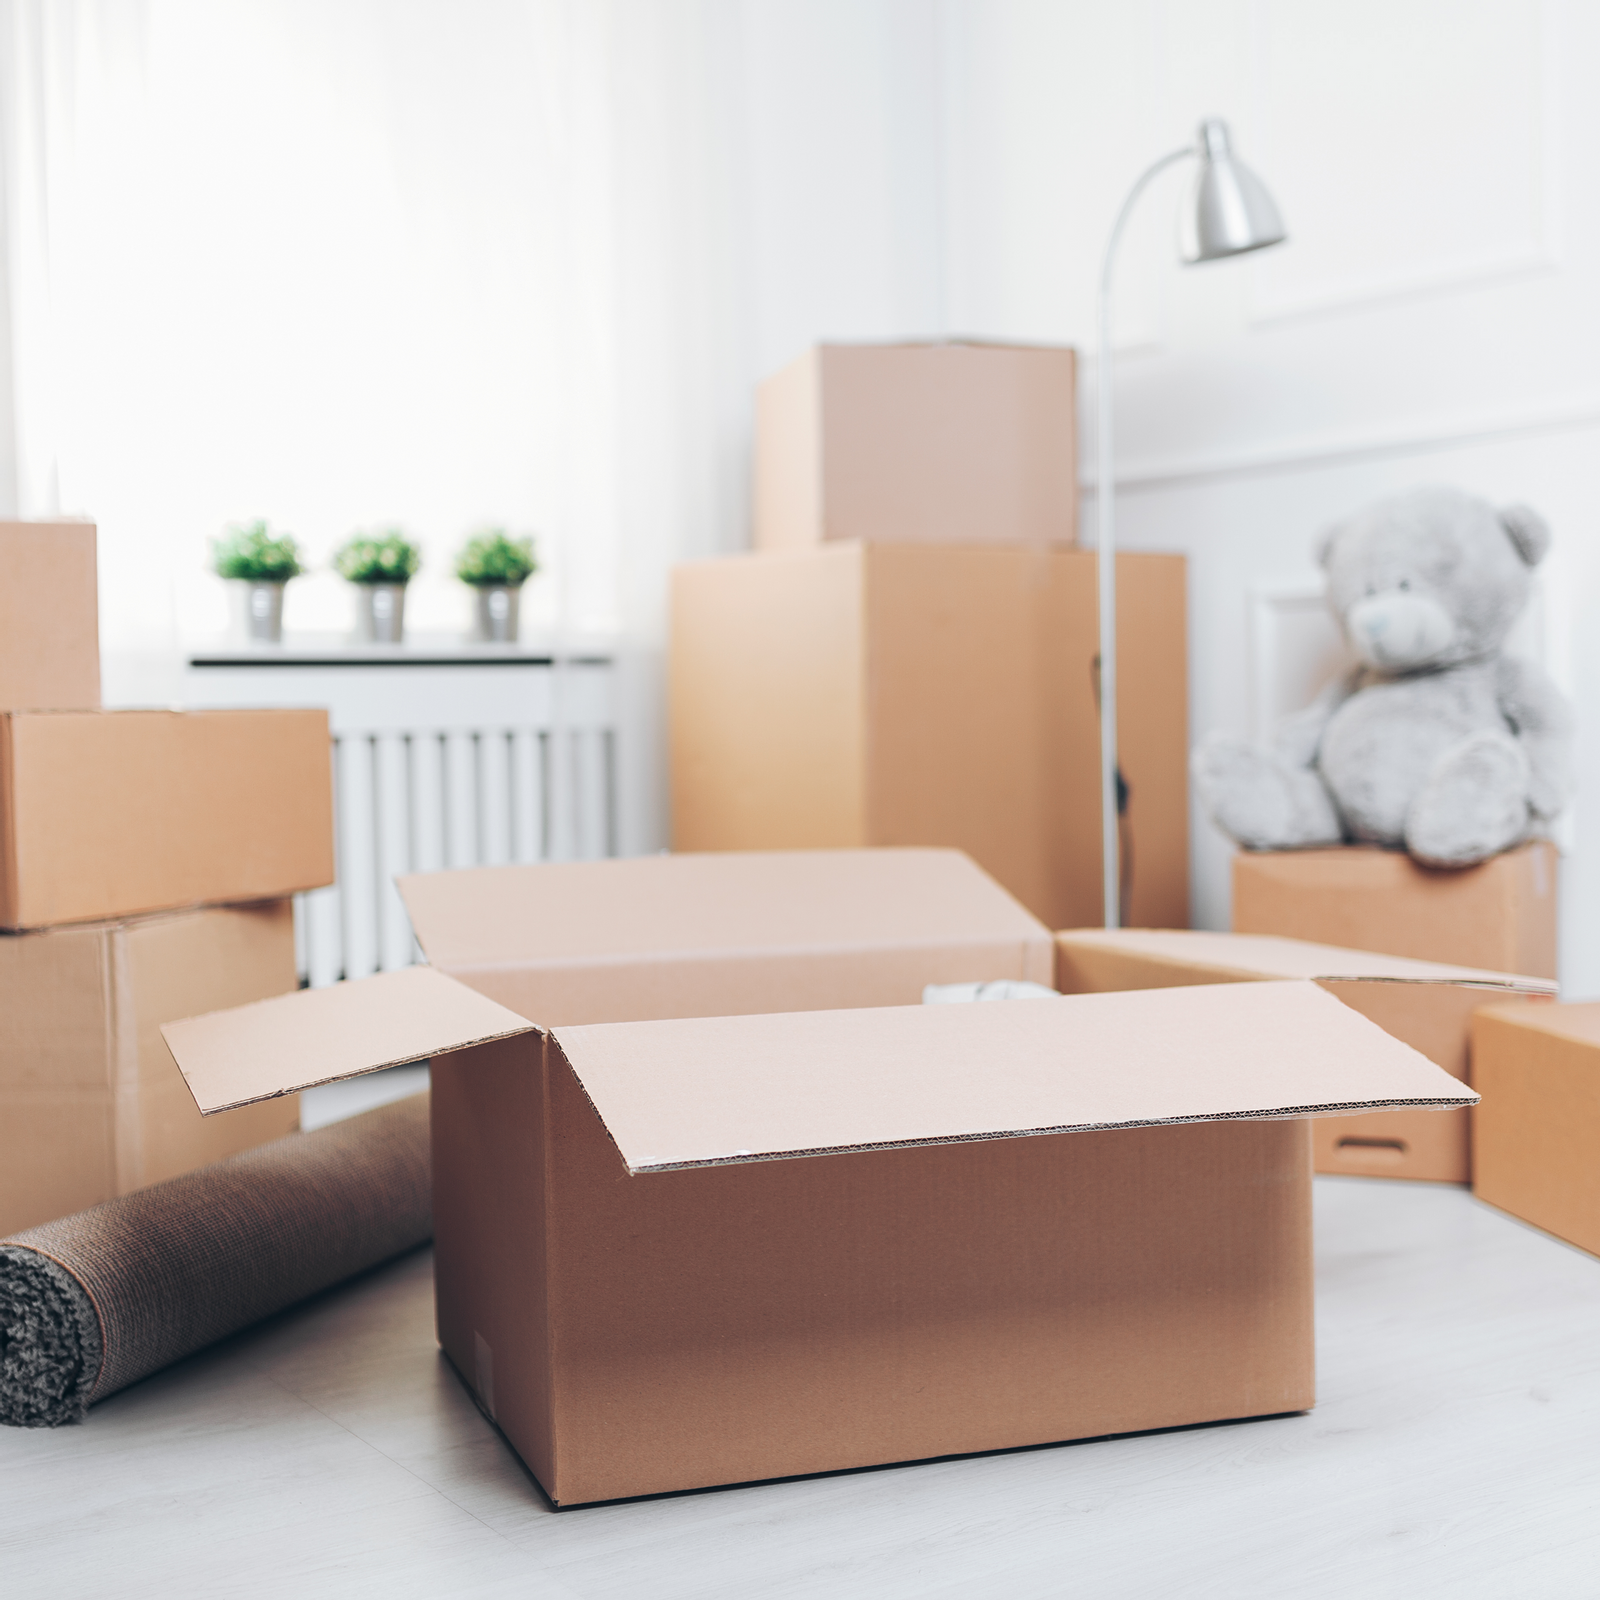 4 Things You Need to Know Before You Move